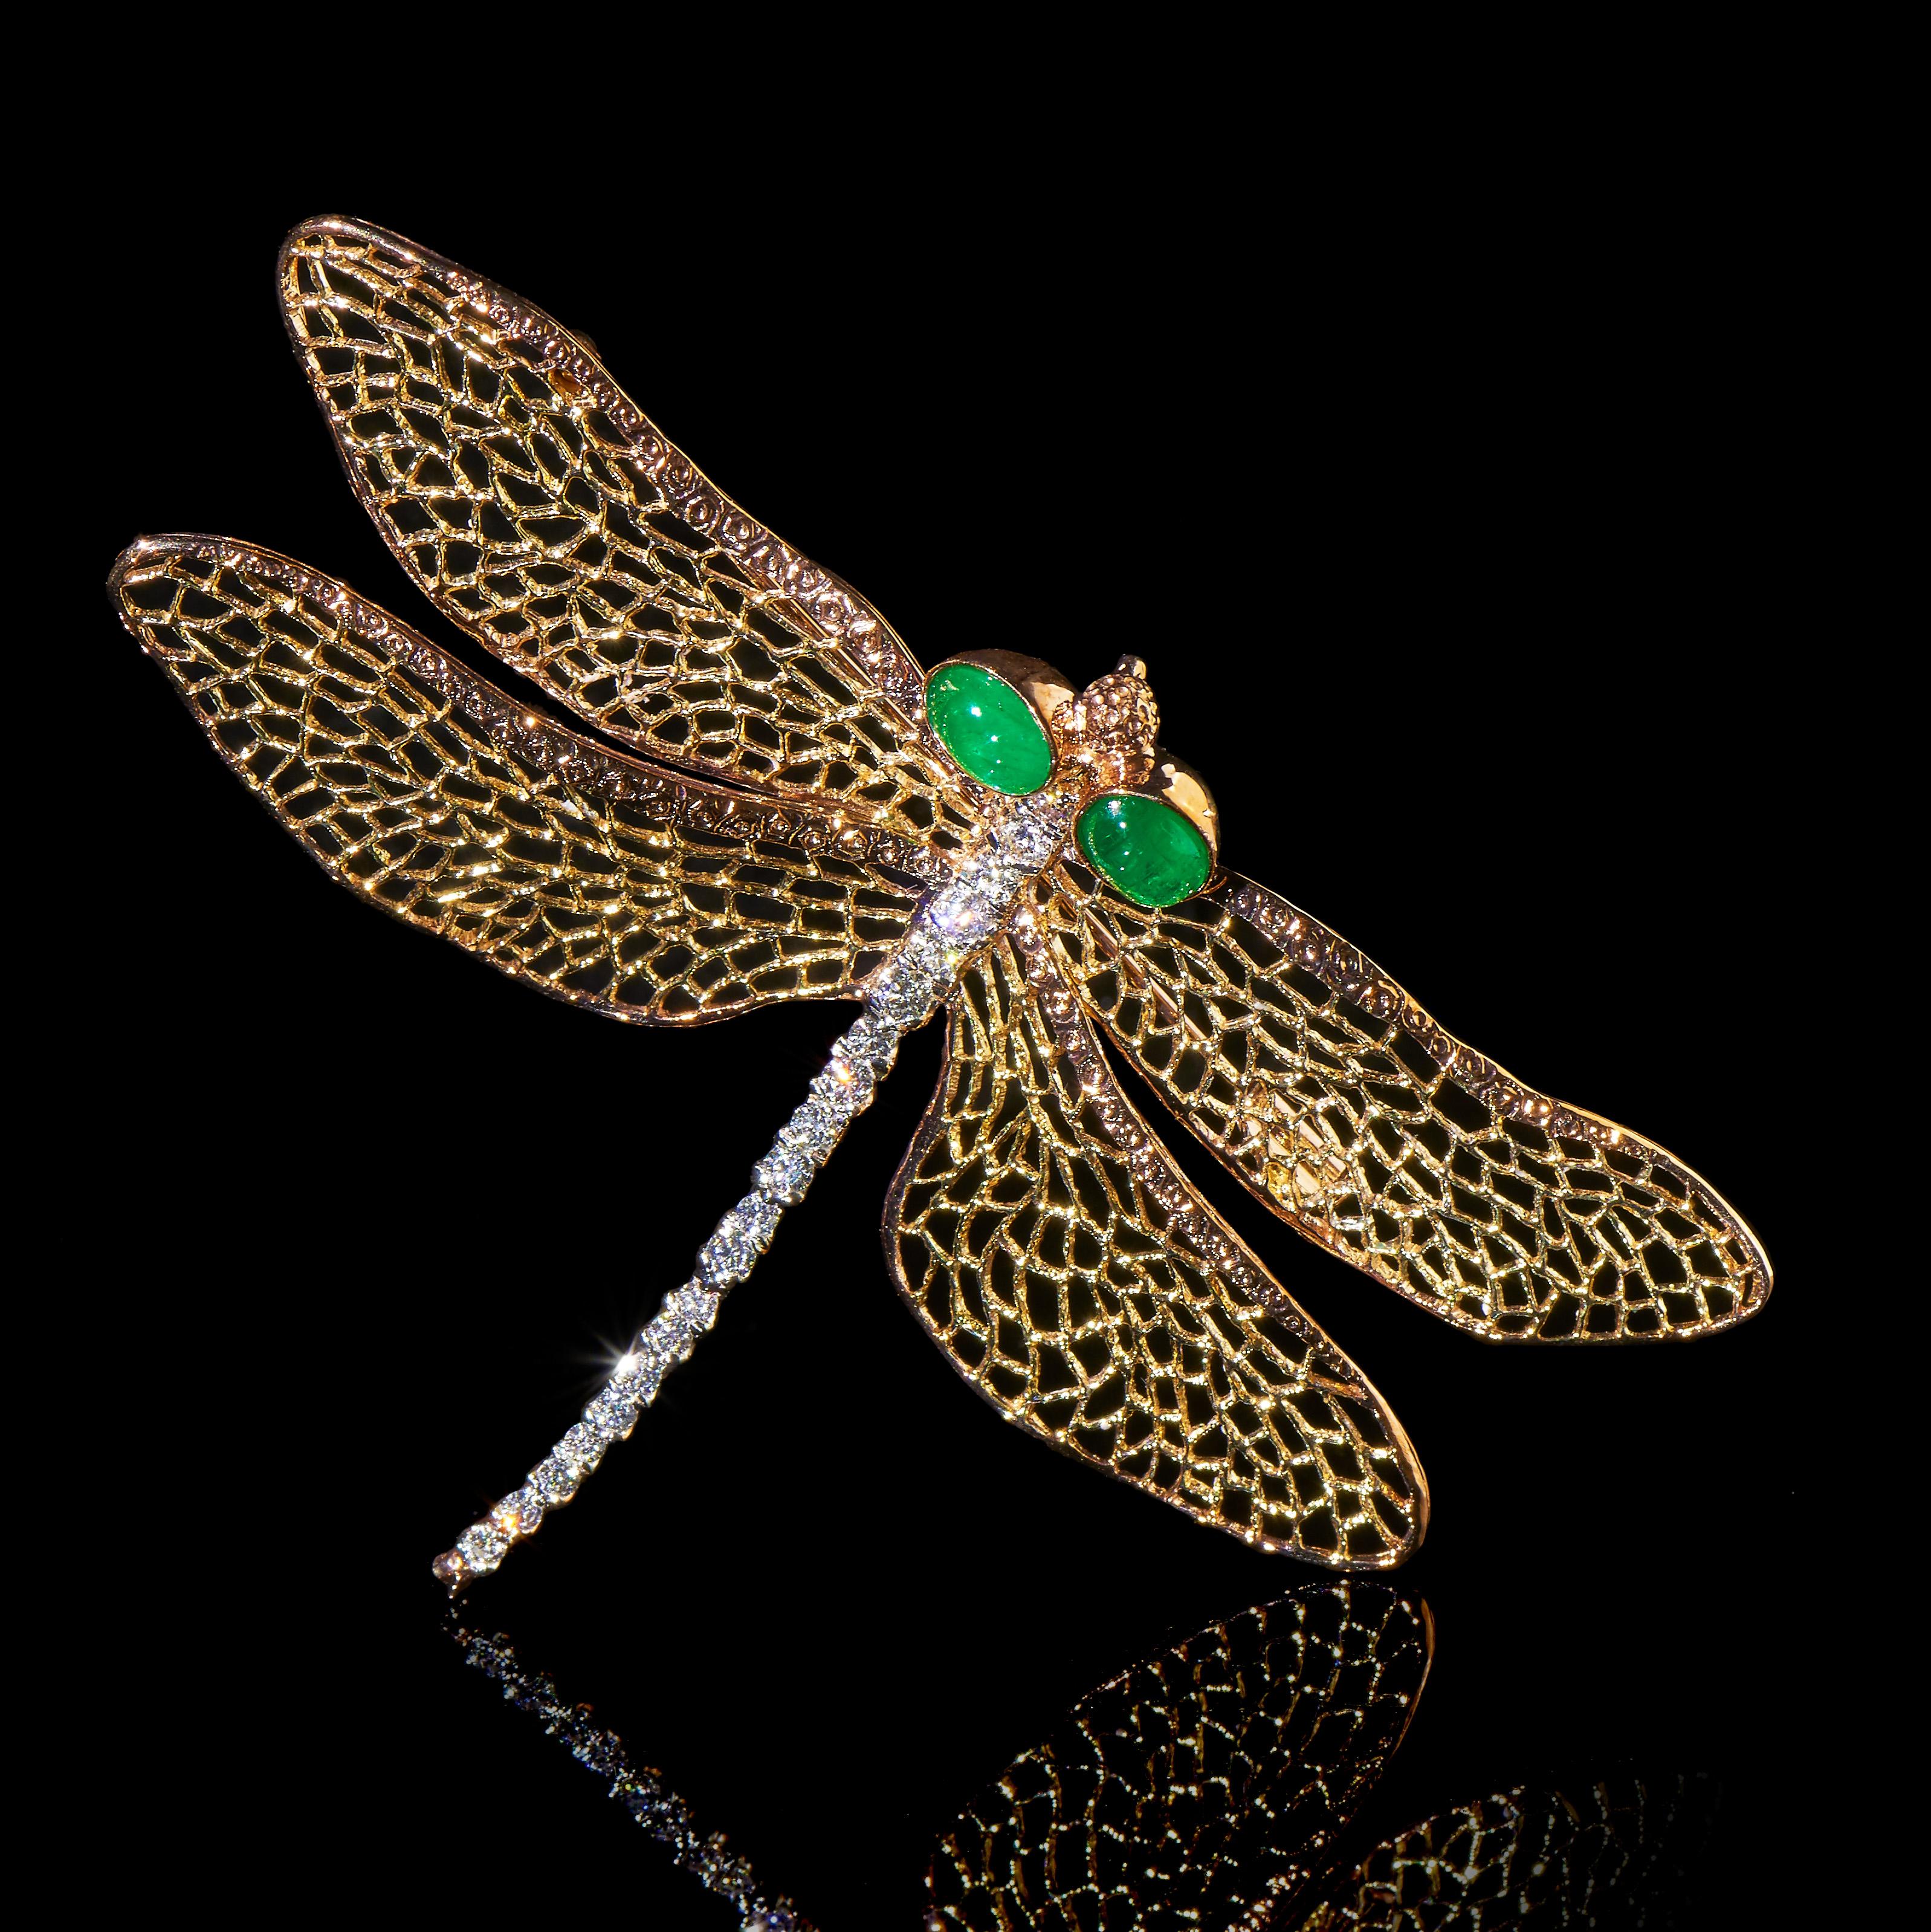 Light Wings

2 Emeralds (1.6cts), 20 Diamonds (0.815ct), 18K Yellow & White Gold. Length: 80mm

This dragonfly is realistically modeled. The veins of its wings are intricately carved in filigree style to show the lightness and transparency of its